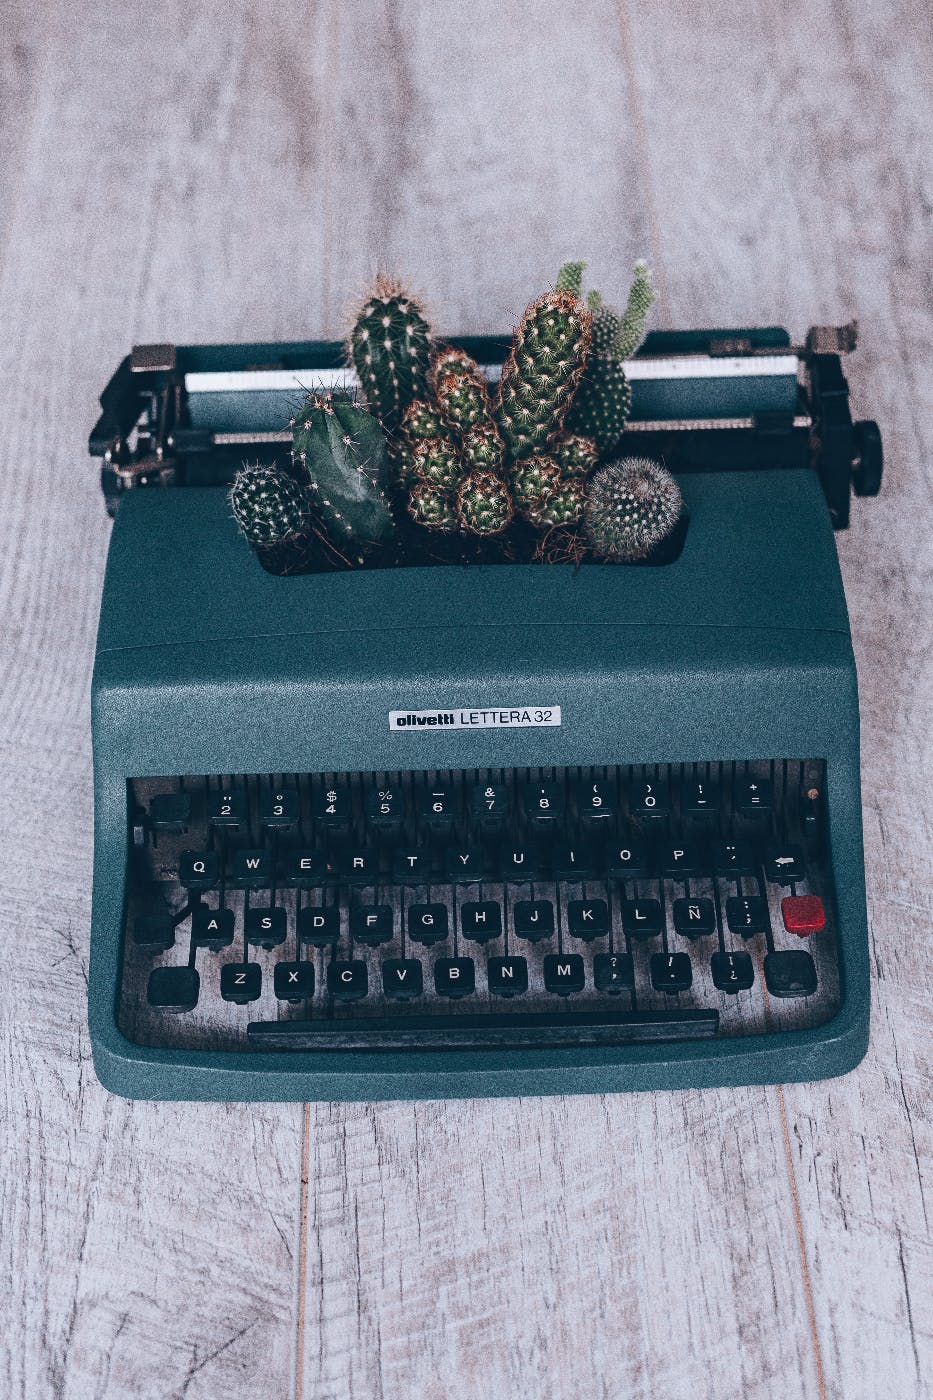 a blue typewriter with cacti growing where the view slot is